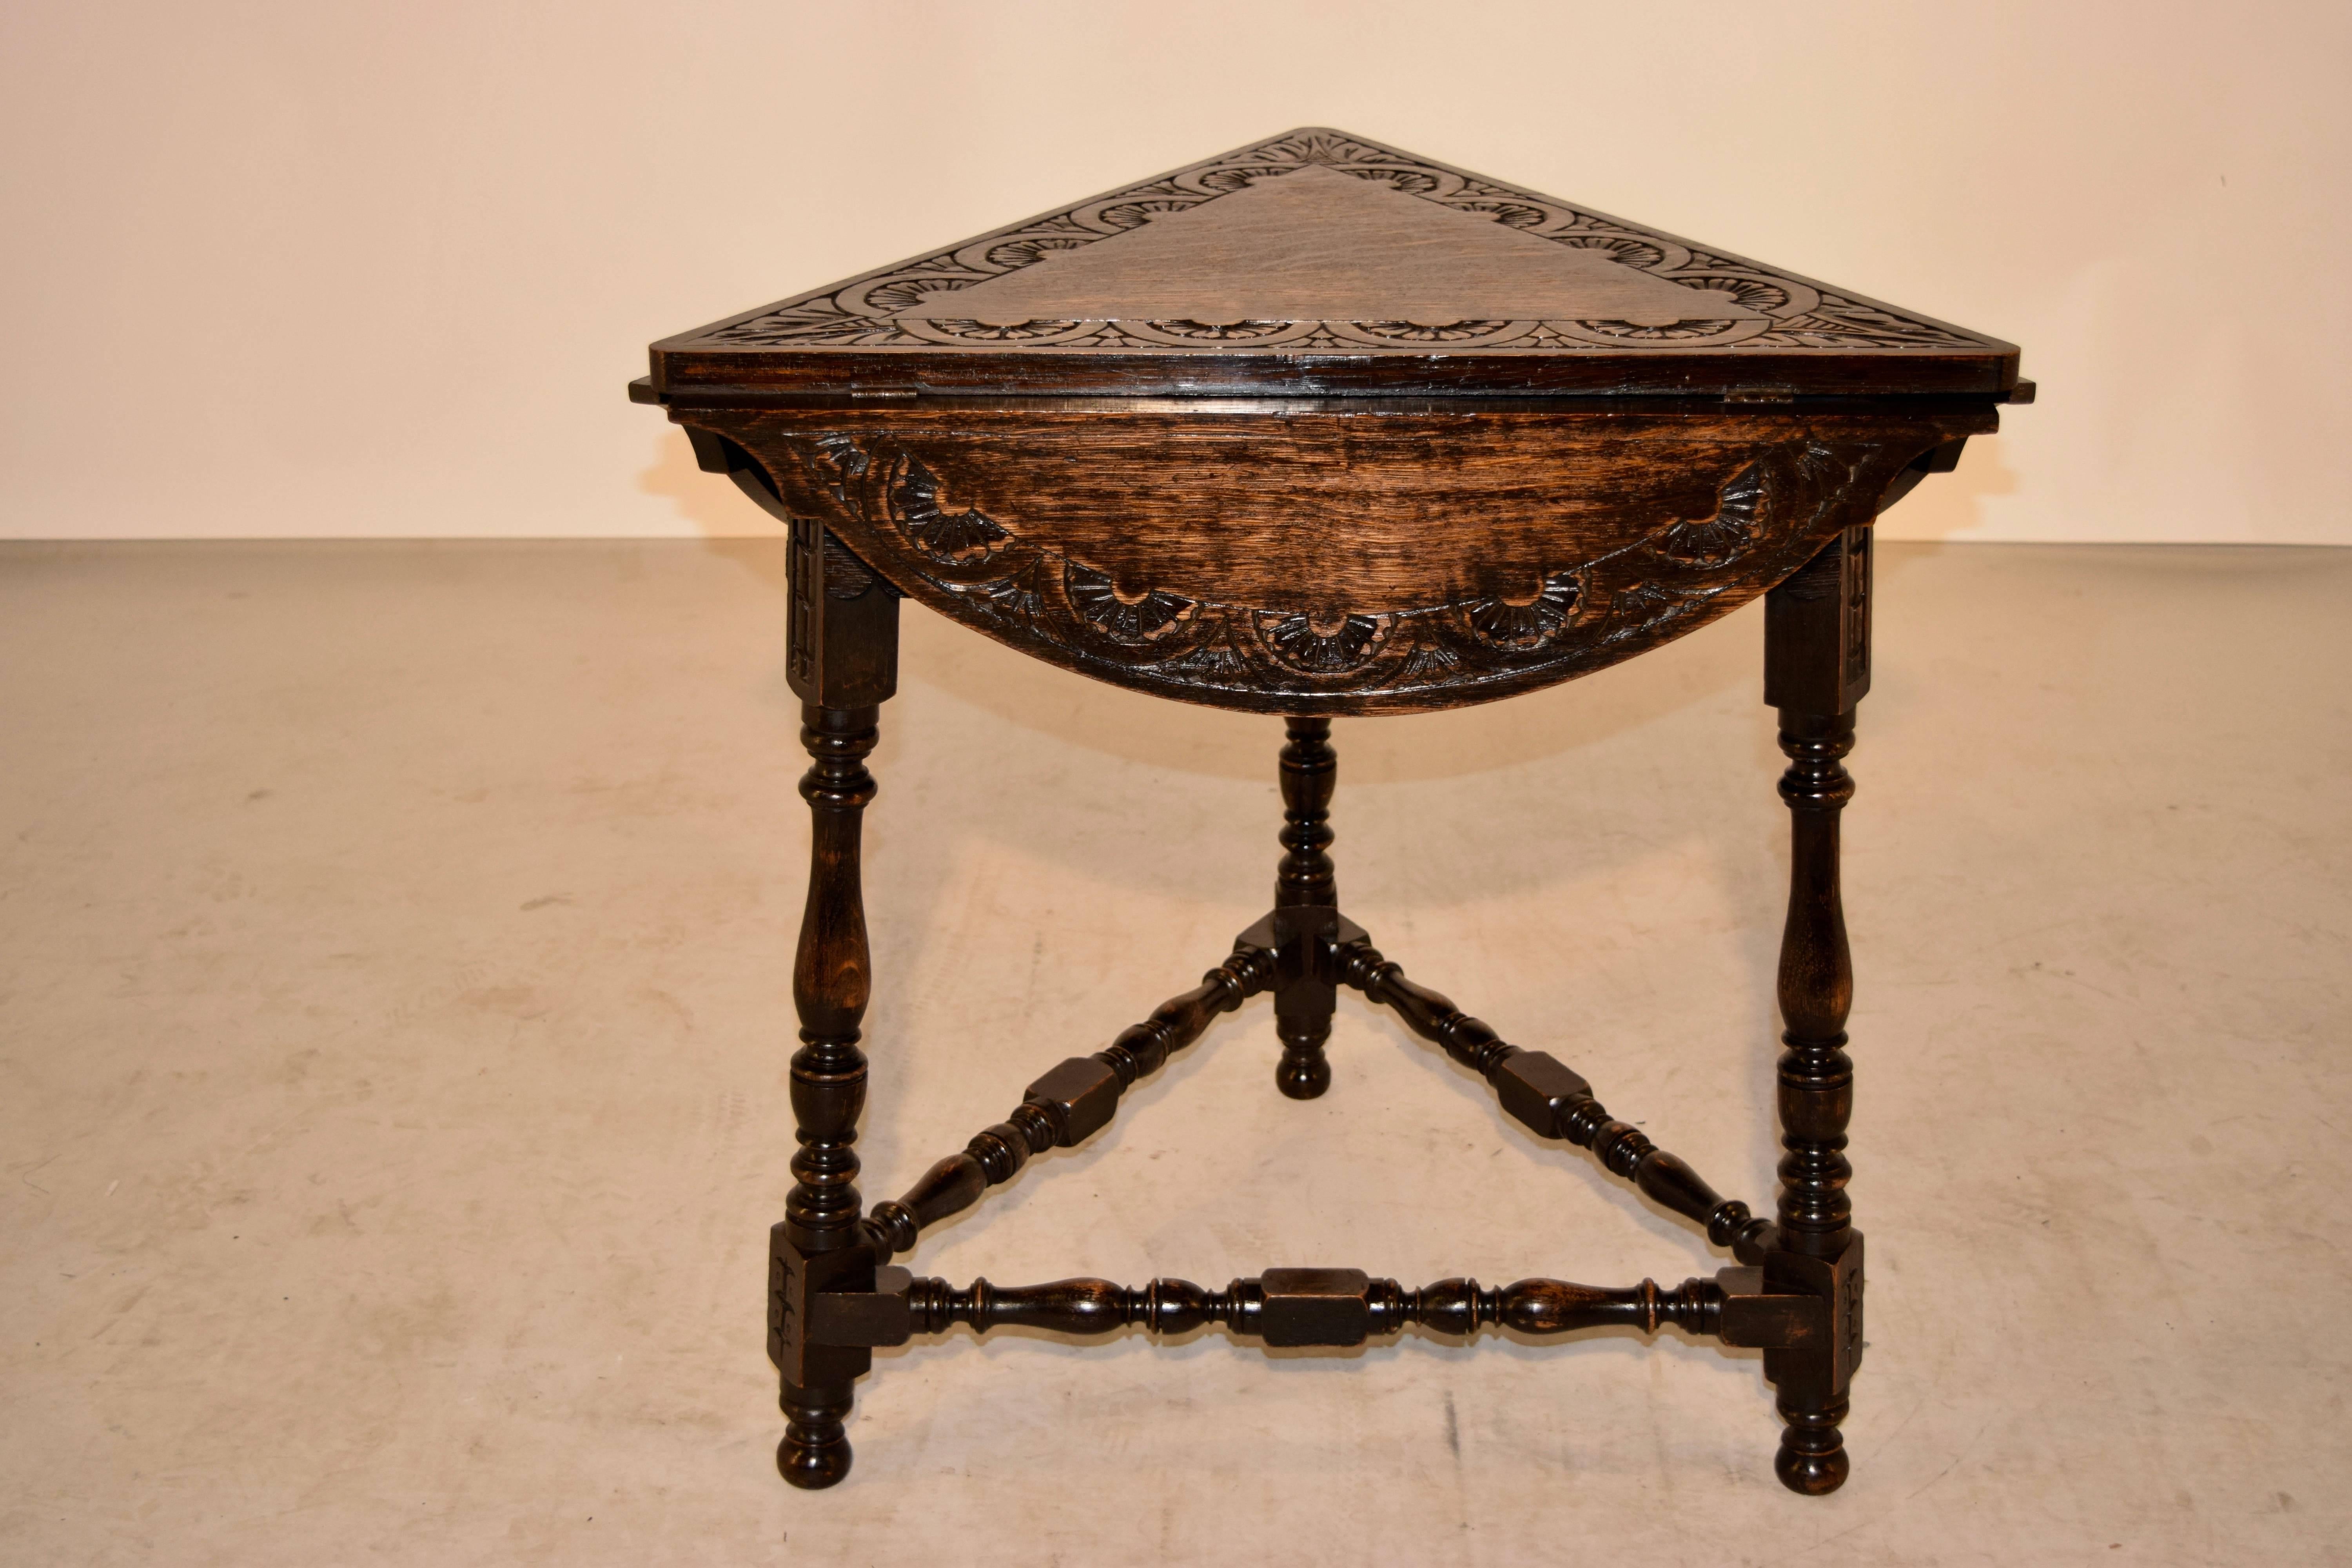 19th century English oak handkerchief table with three carved and scalloped drop leaves and a carved banded center, following down to a hand scalloped apron and supported on hand-turned legs and stretchers. Table open measures 28.63 x 29.